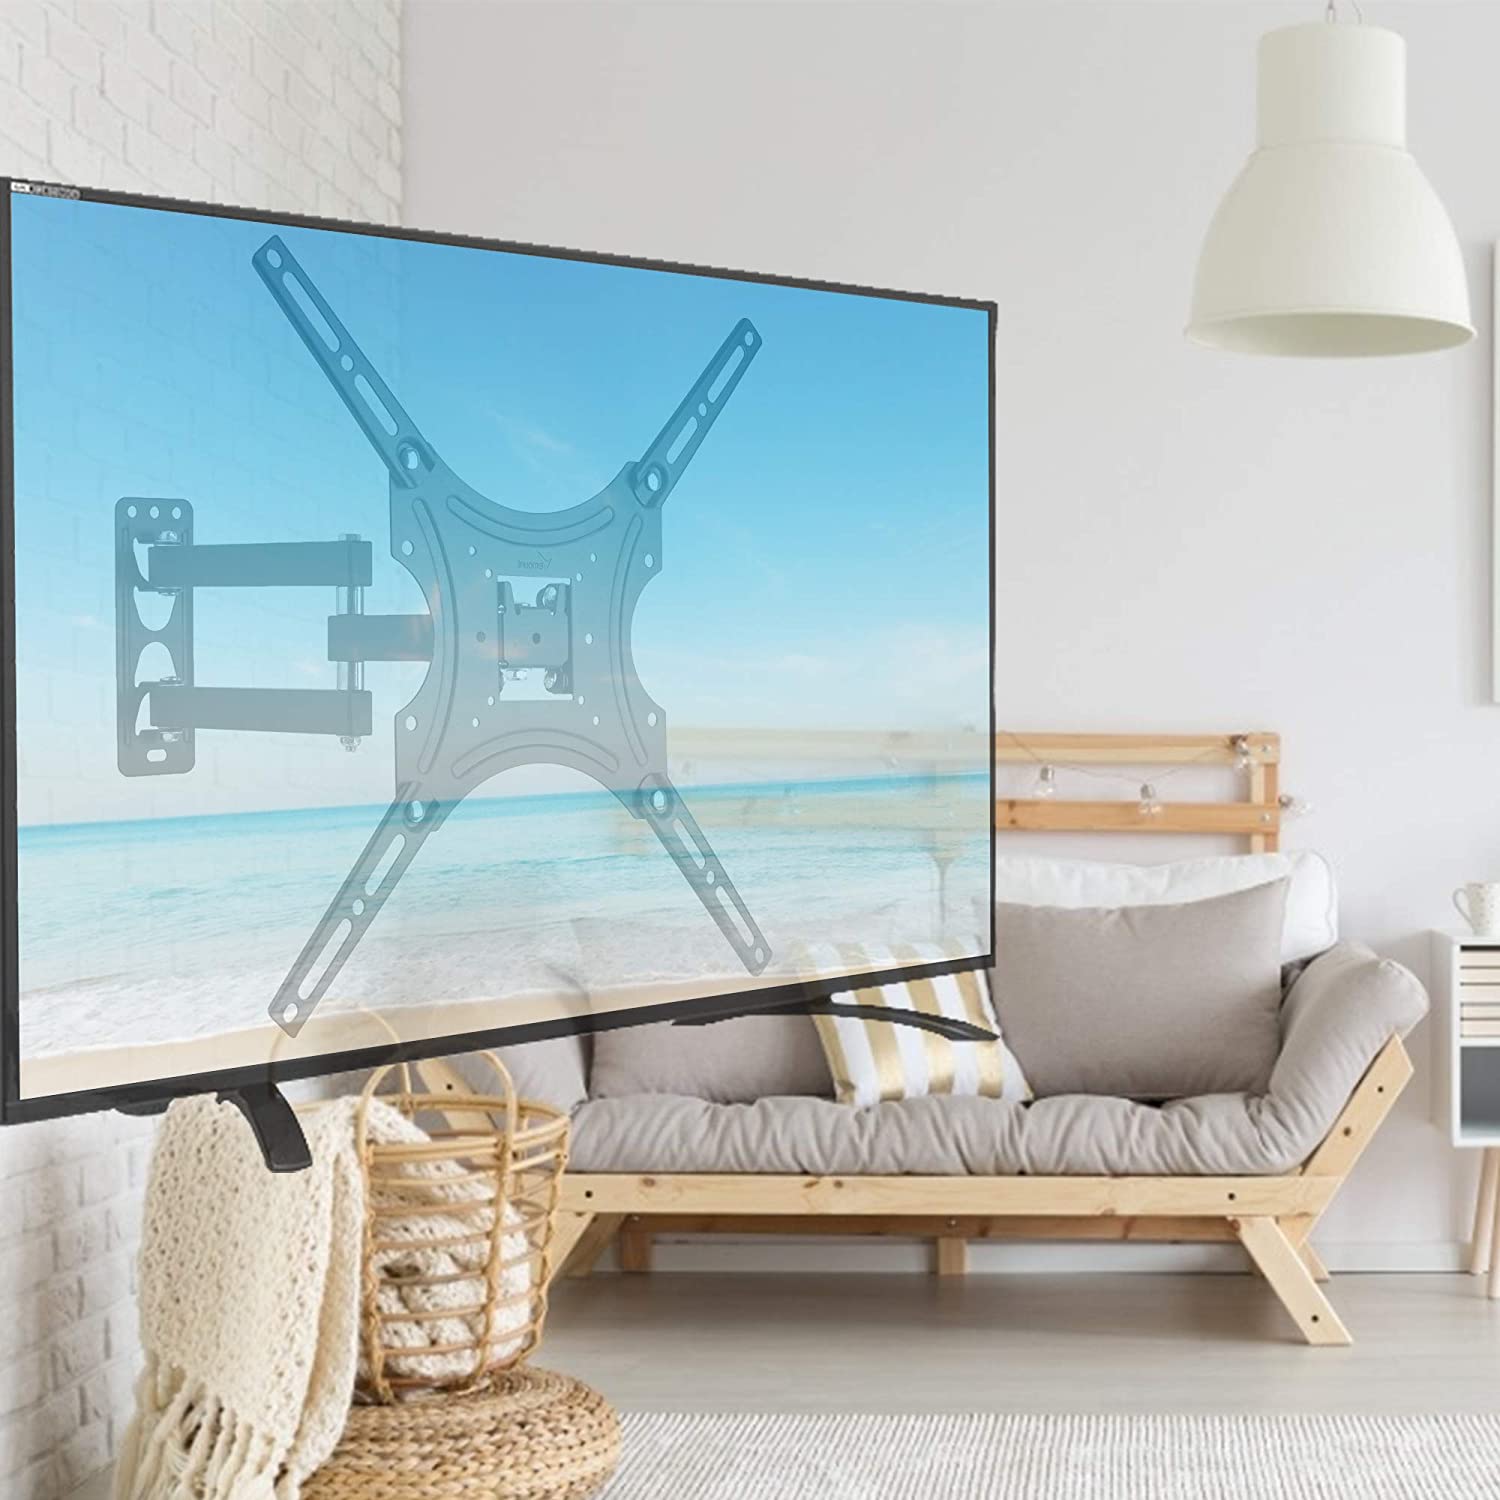 Full Motion Monitor Wall Mount TV Bracket for 26-55 Inch LED, LCD Flat Screen TV and Monitor, TV Mount with Swivel Articulating Arm, Monitor Mount Up to VESA 400x400mm and 66LBS - image 2 of 10